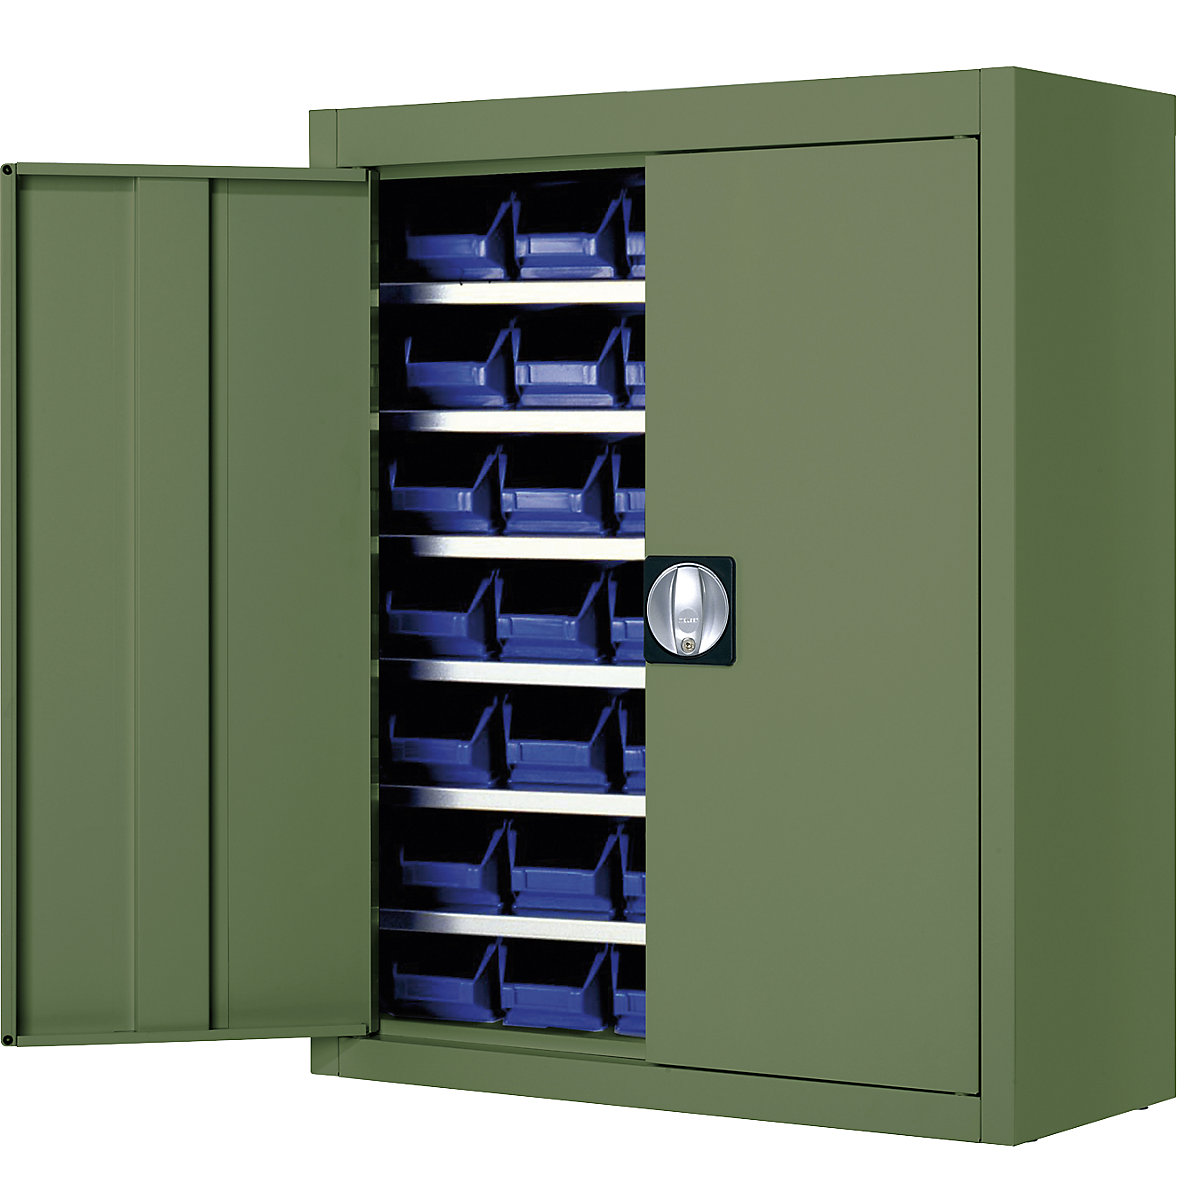 Storage cupboard with open fronted storage bins – mauser, HxWxD 820 x 680 x 280 mm, single colour, green, 42 bins-6